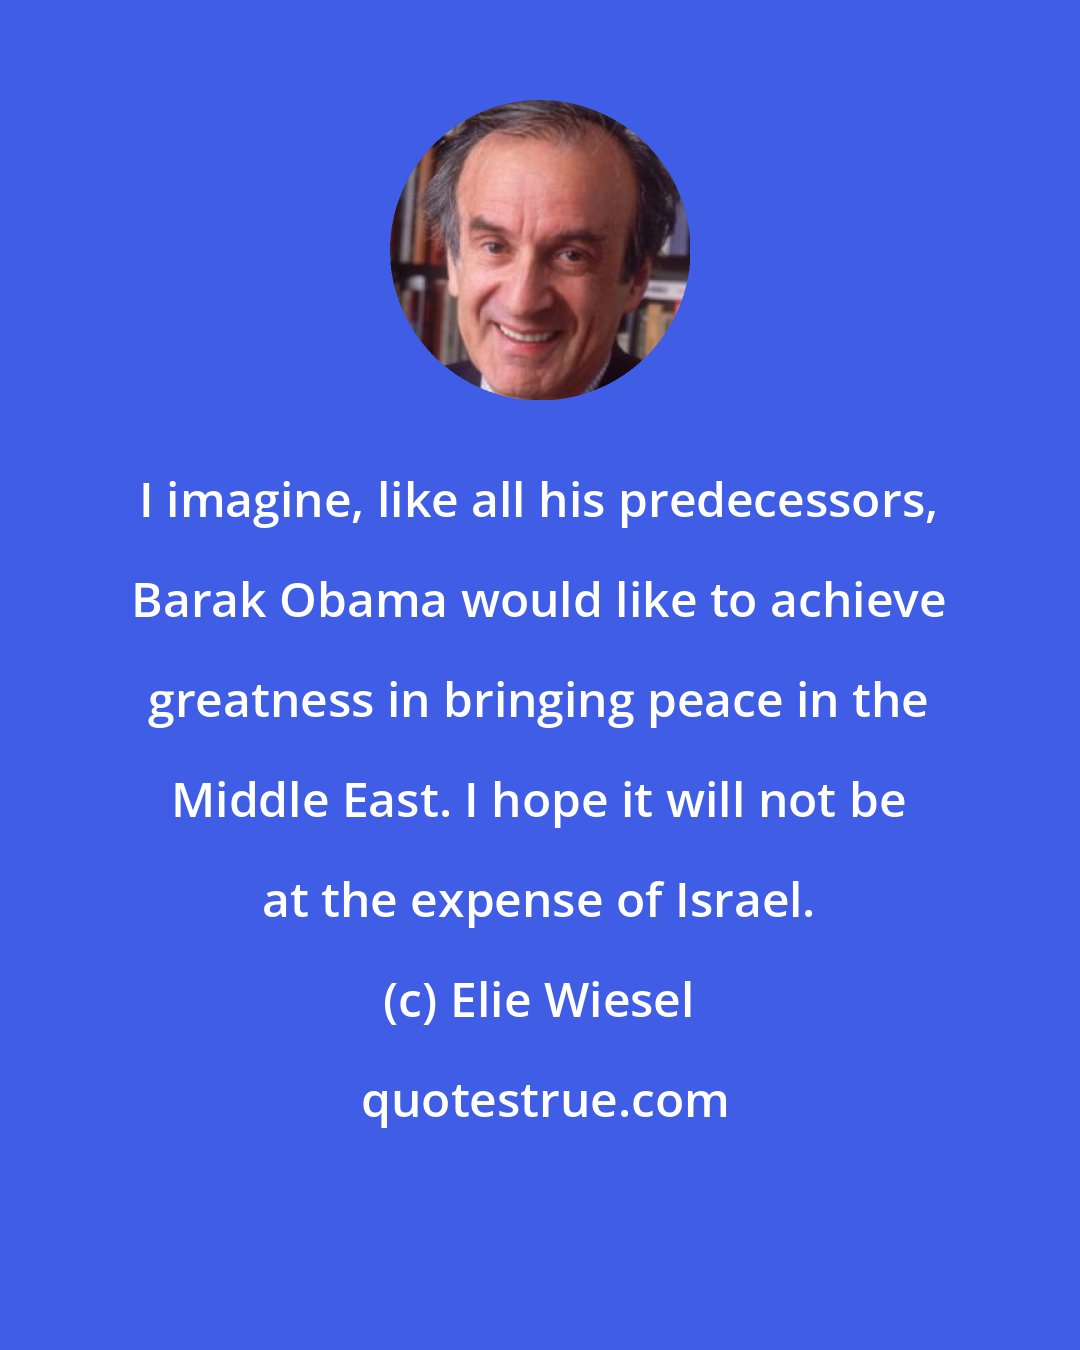 Elie Wiesel: I imagine, like all his predecessors, Barak Obama would like to achieve greatness in bringing peace in the Middle East. I hope it will not be at the expense of Israel.